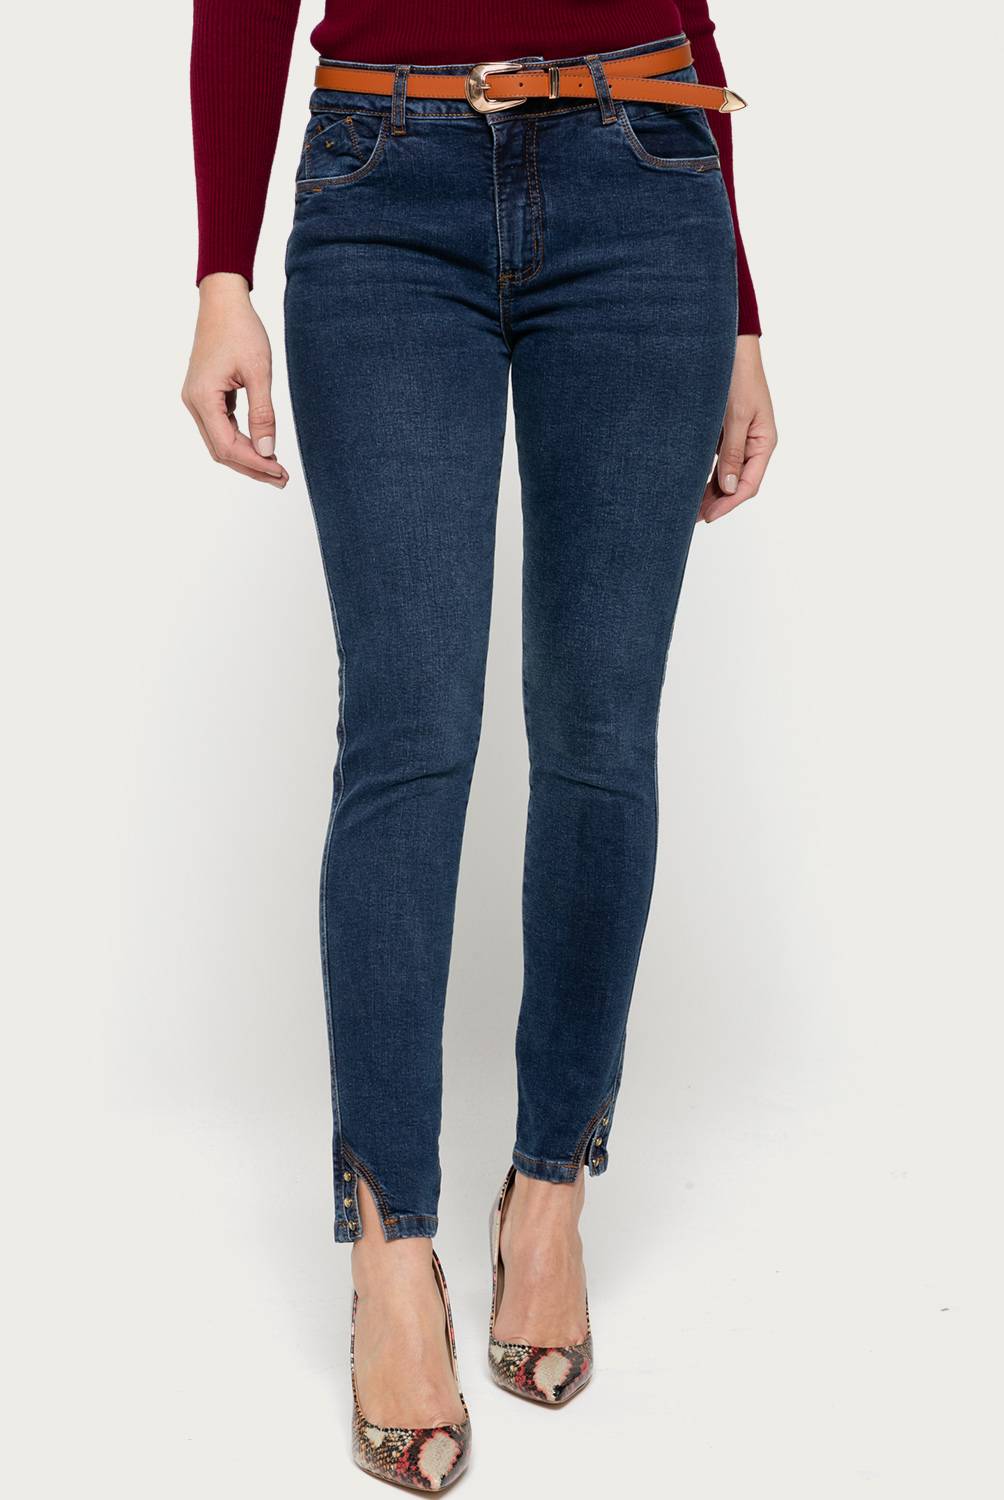 APOLOGY - Jeans Mujer Curvy UP